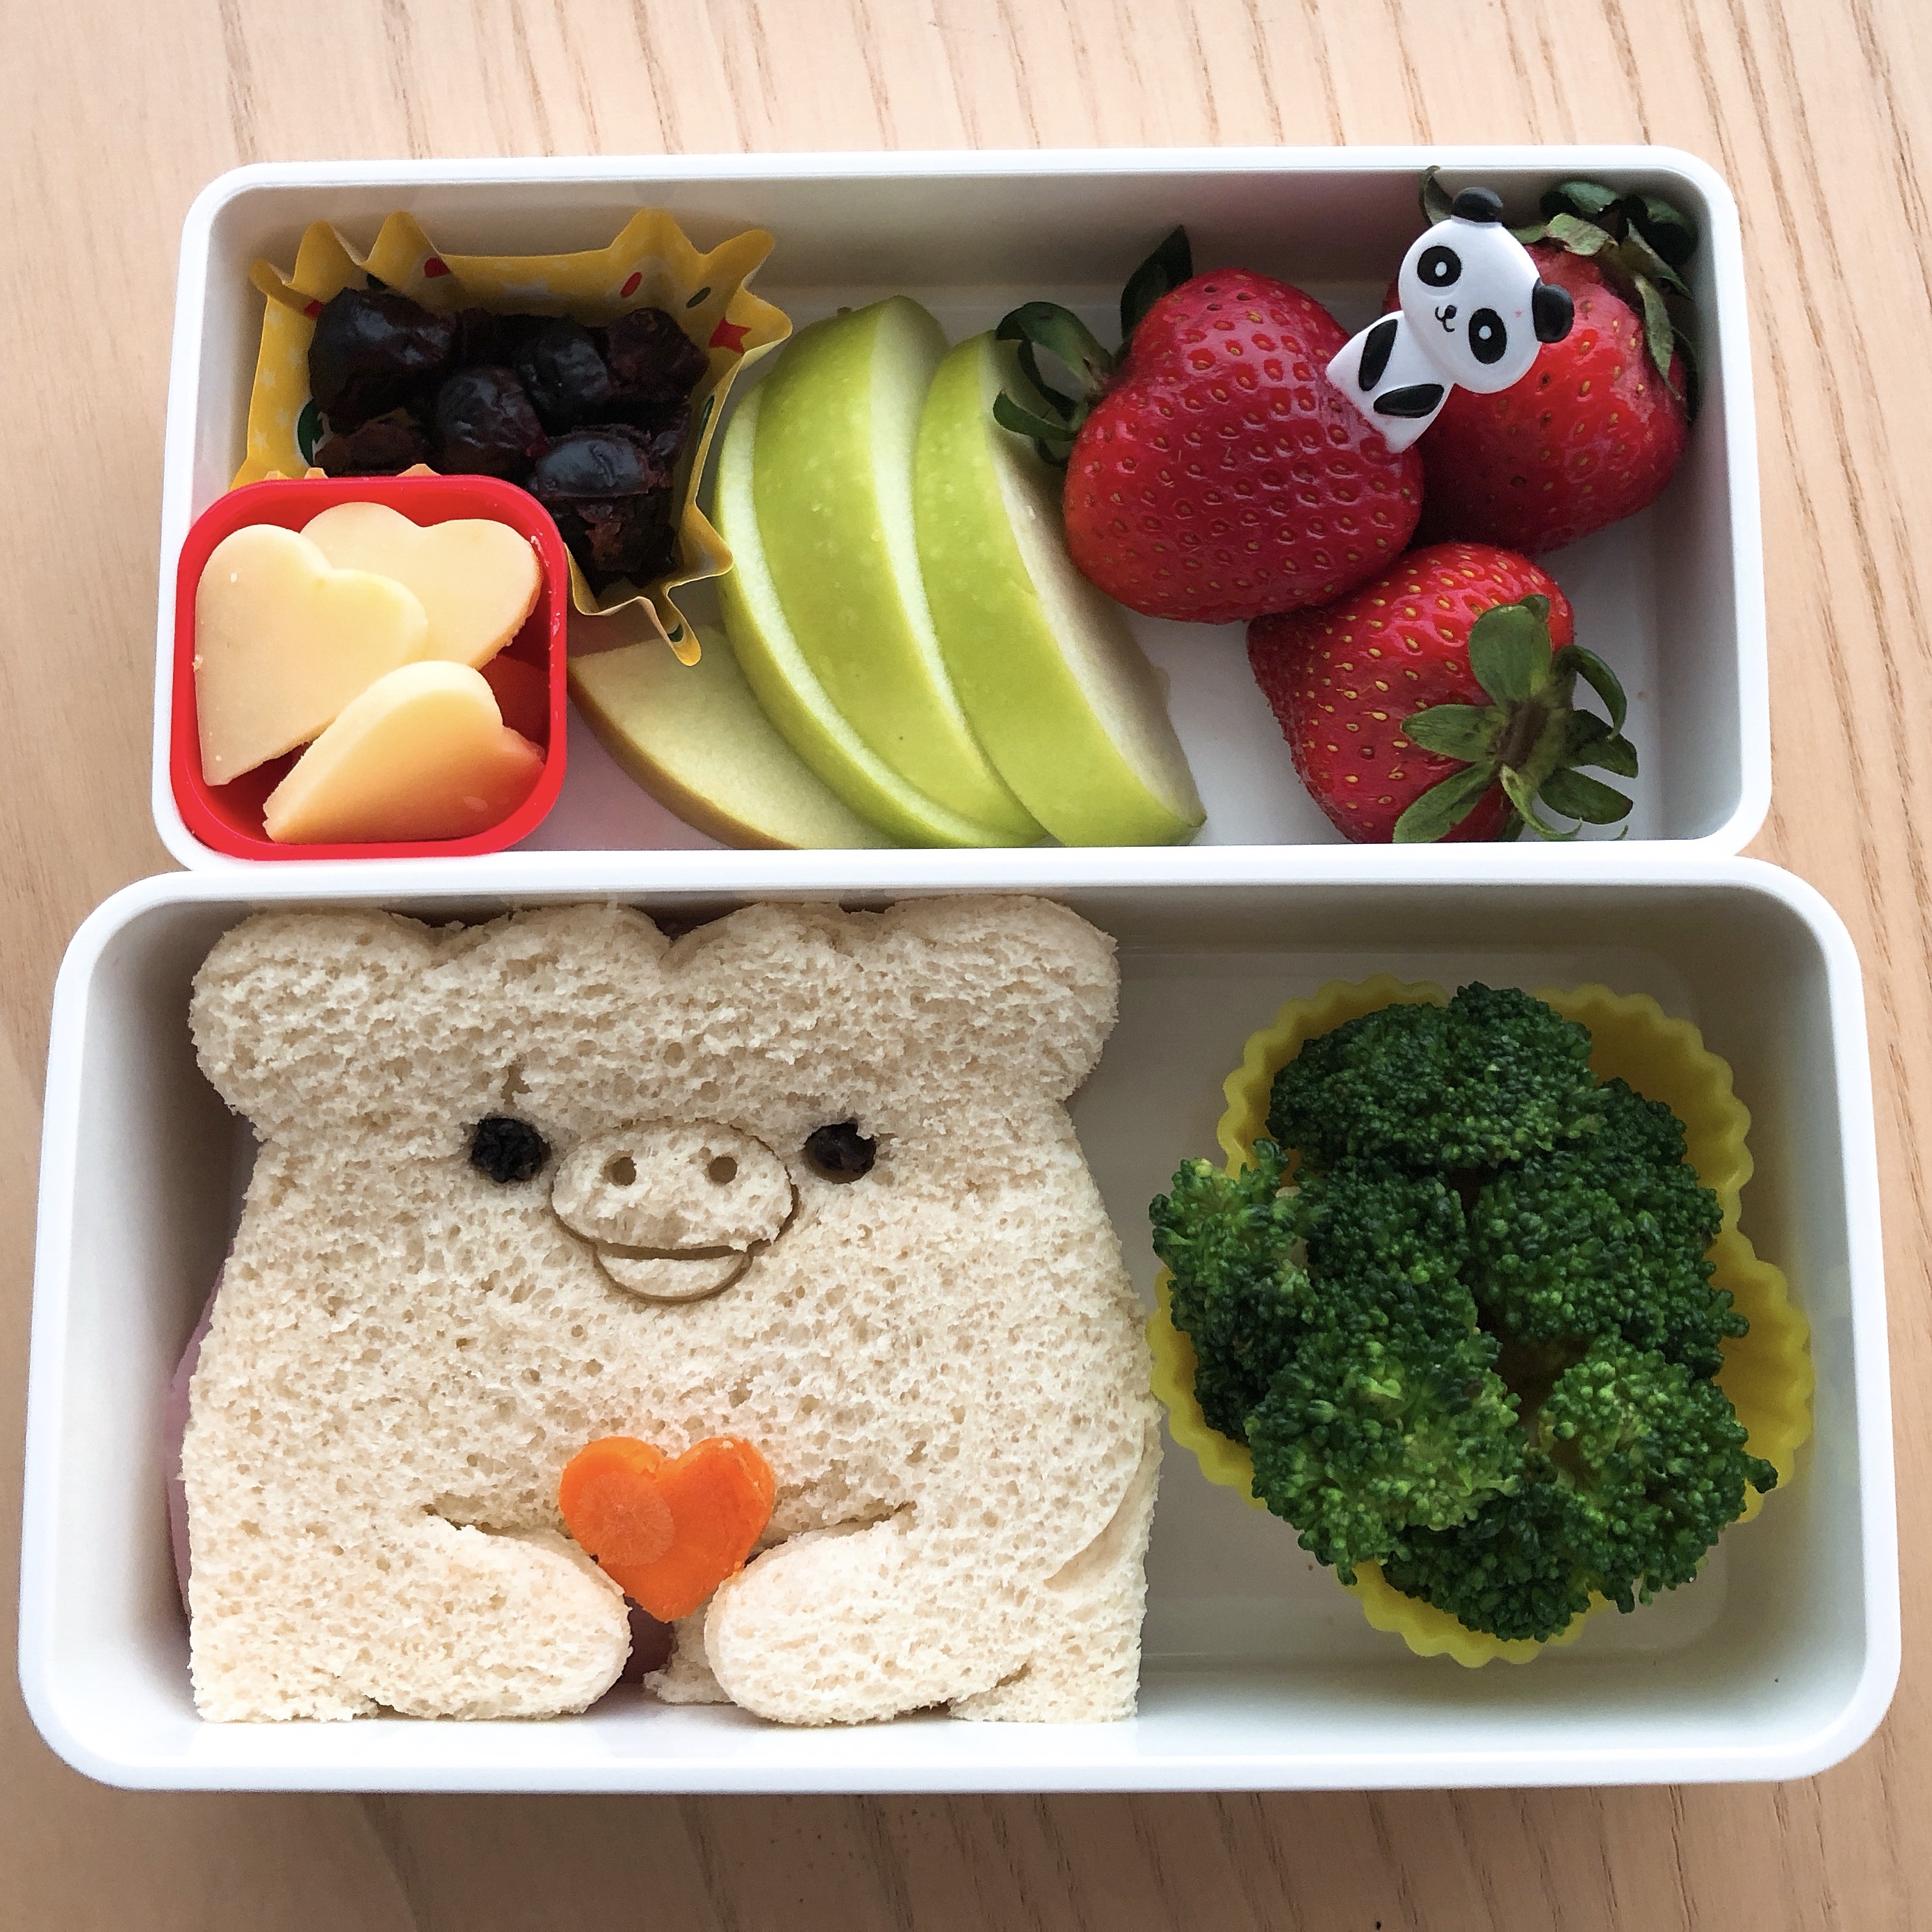 Bento lunches are both easy and fun with animal-shape sandwich cutters and decorative picks.